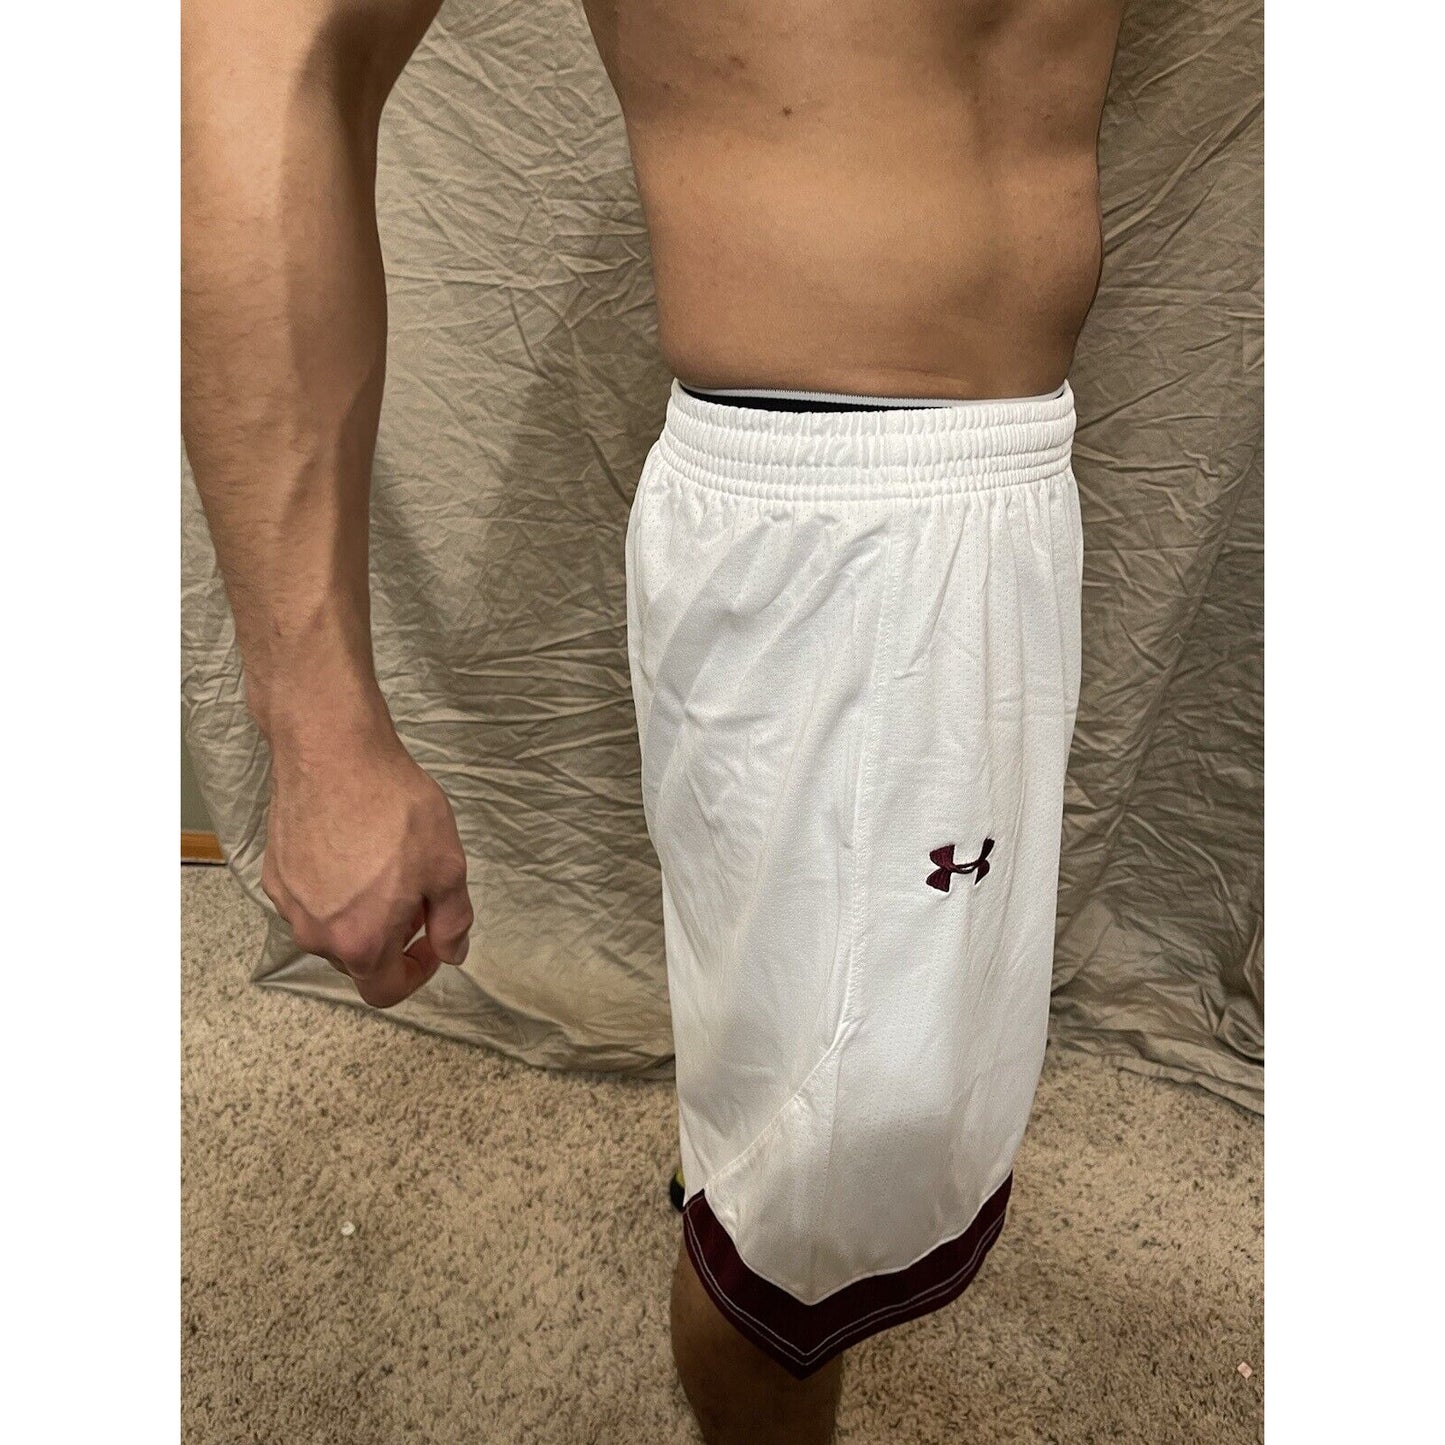 Boy's under armour Youth XL white and Maroon Lacrosse style shorts no pockets